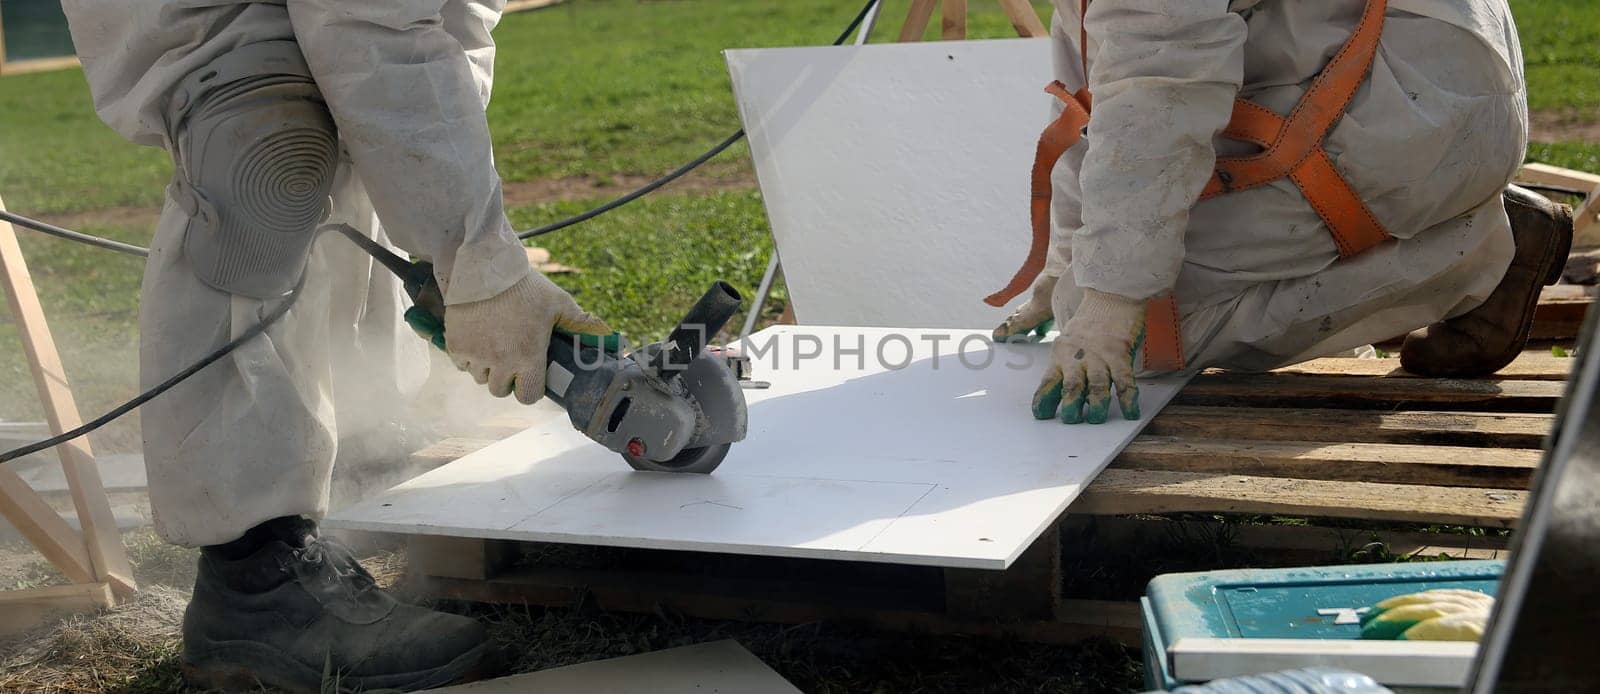 Construction Worker Cutting White Panel With Grinder on a Sunny Day by Hil